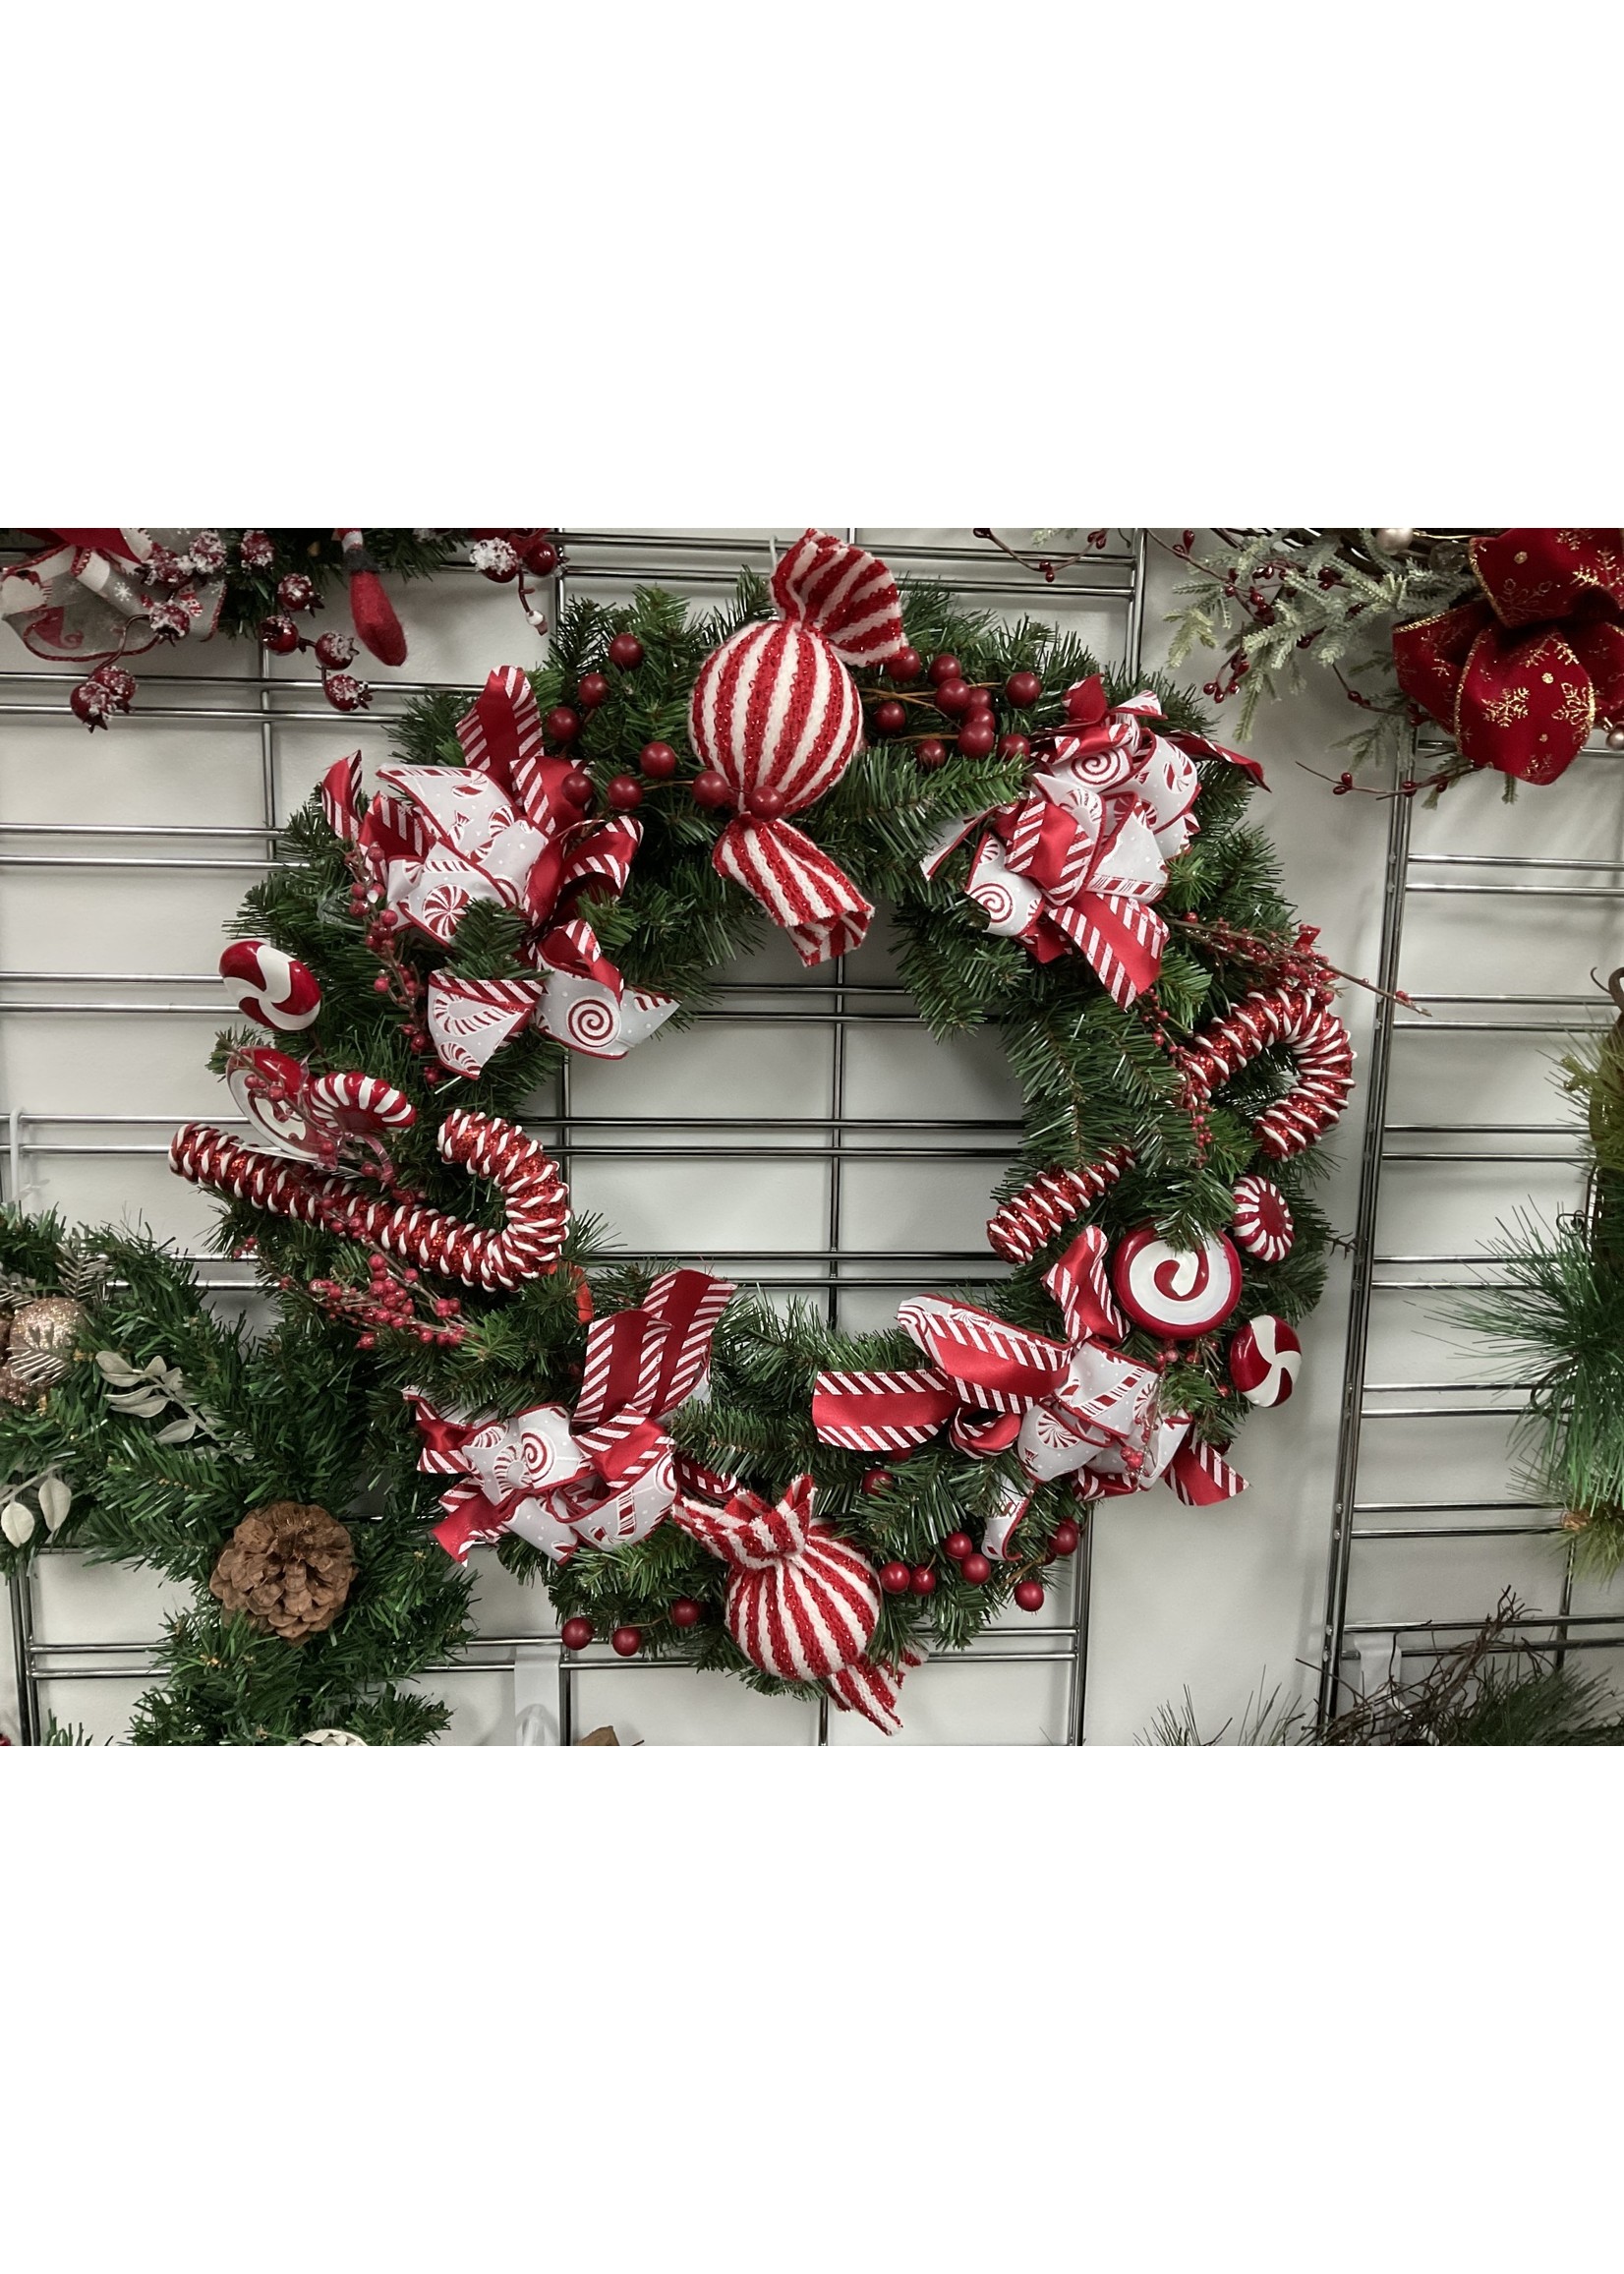 My New Favorite Thing Wreath Evergreen with Peppermint and Candy Canes 23 inch